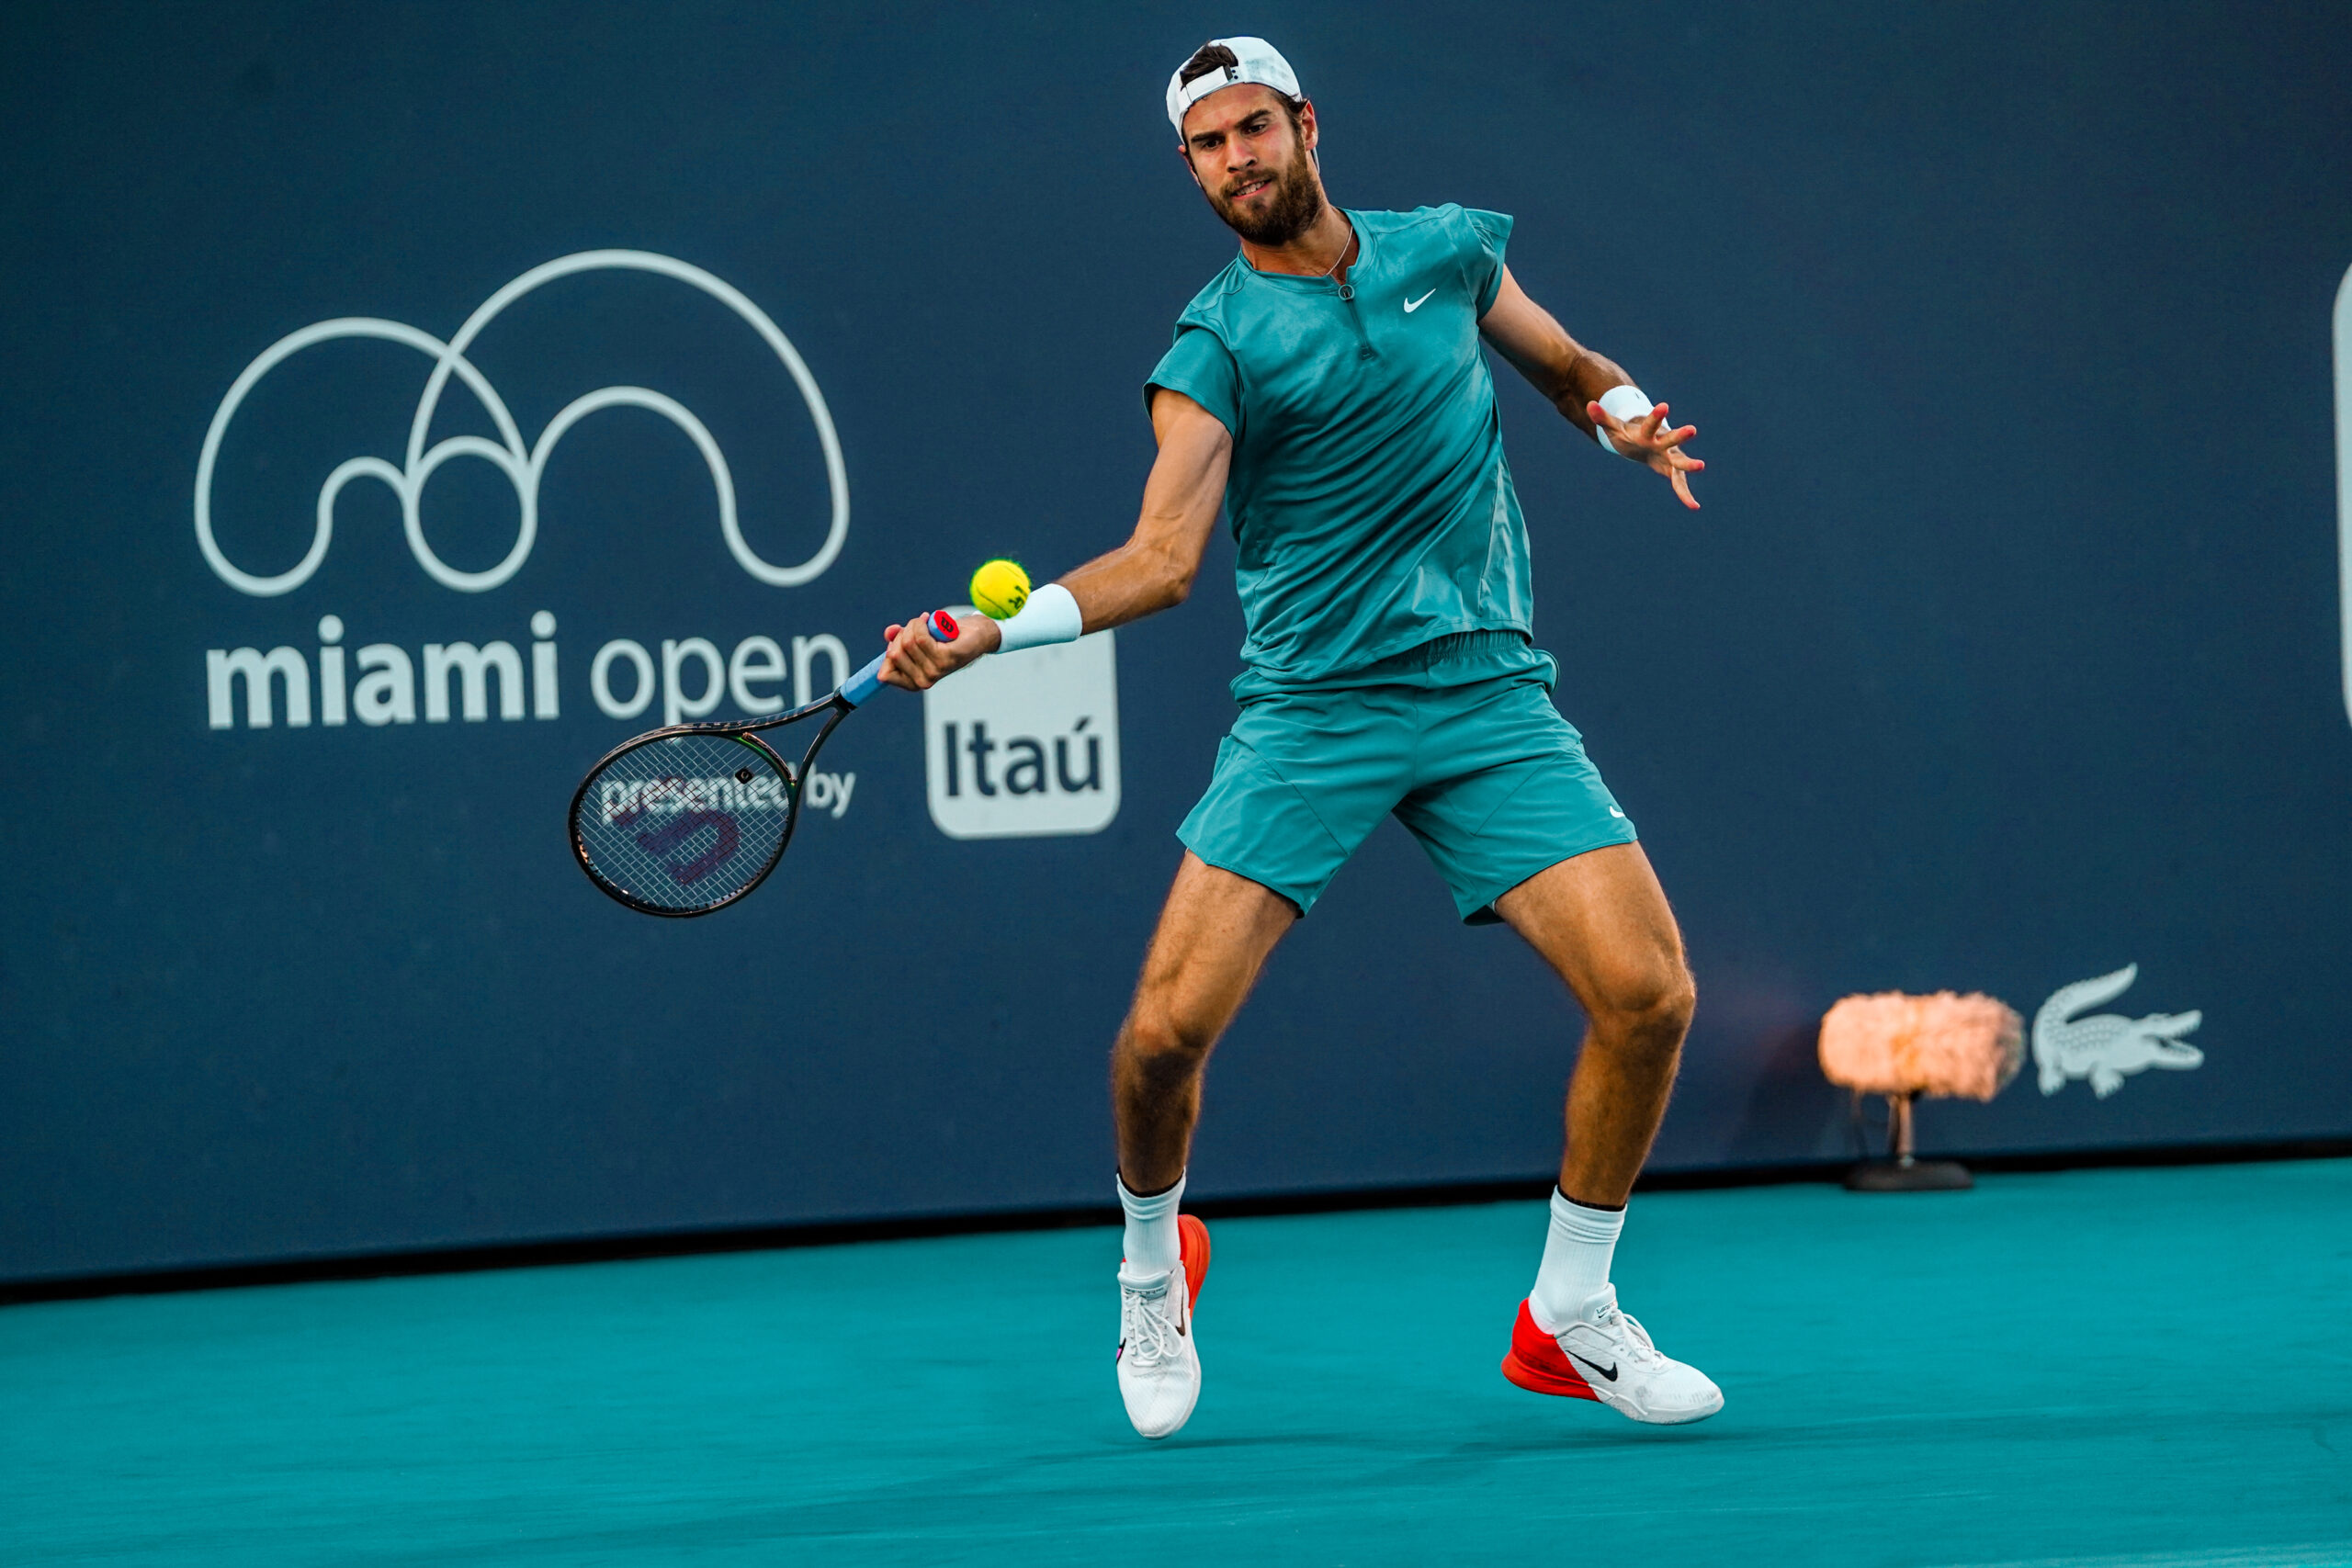 Karen Khachanov hits a forehand during his match against Tomas Etcheverry at the 2023 Miami Open.